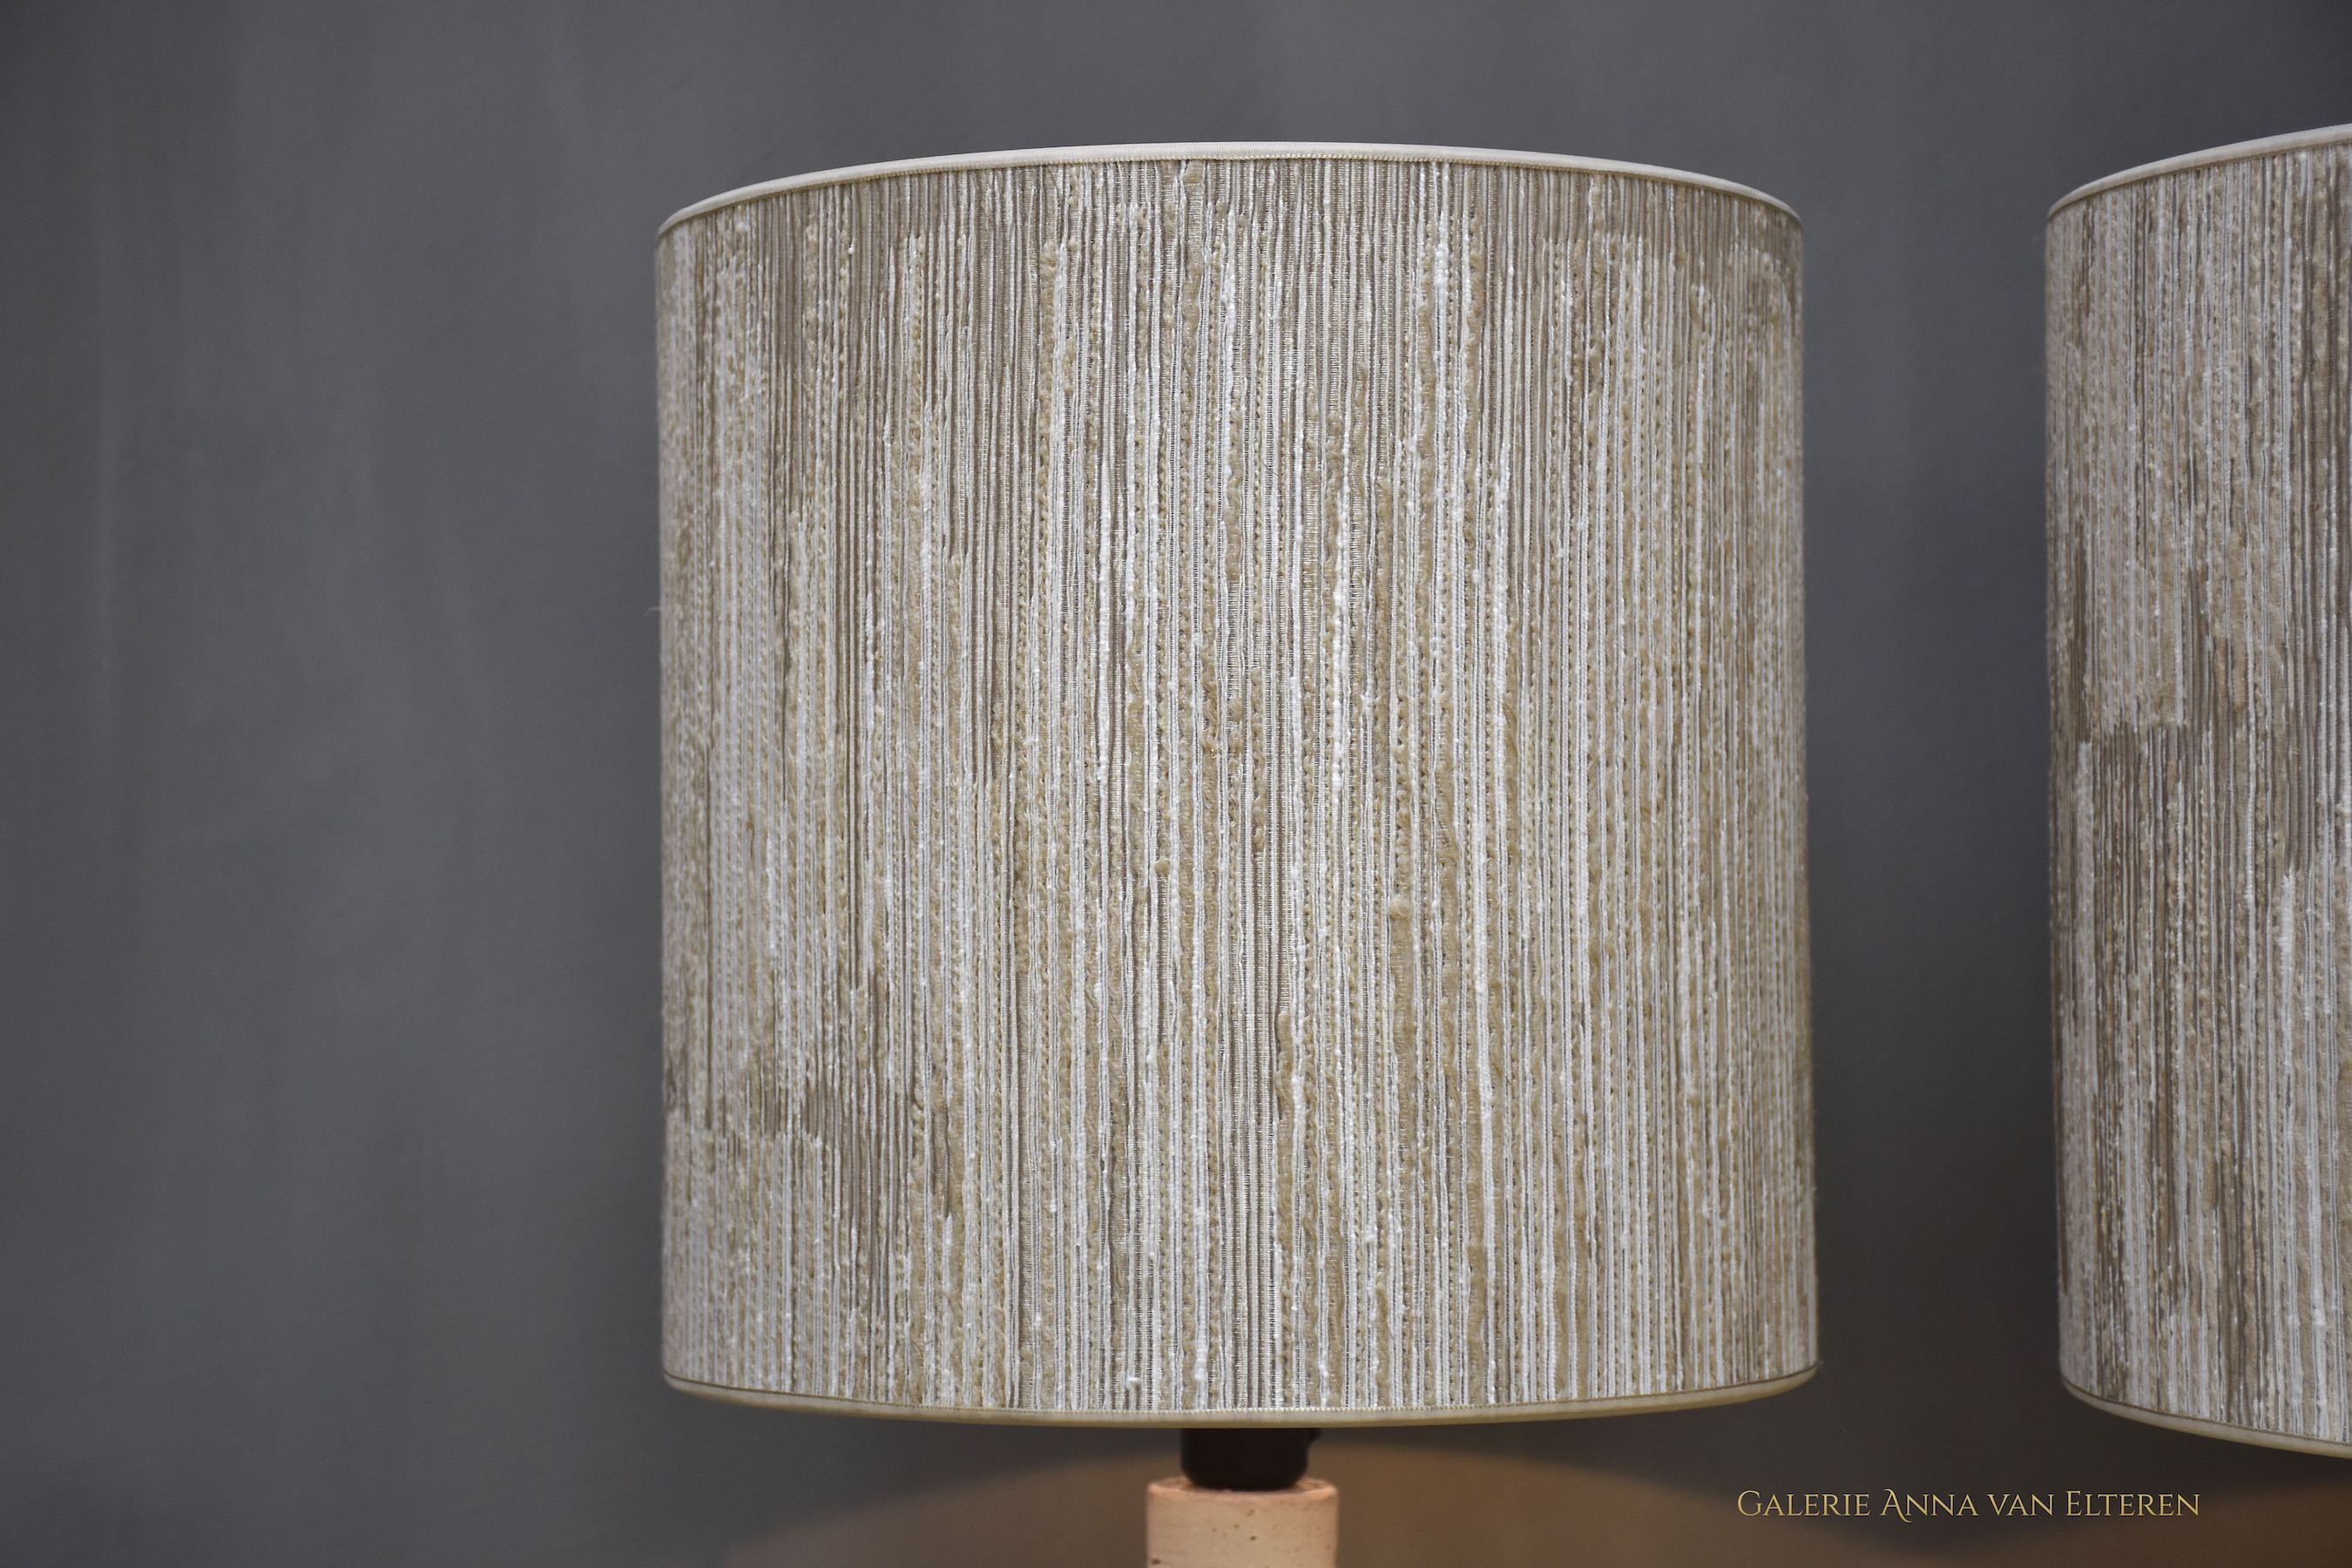 Pair of ceramic table lamps by Bitossi